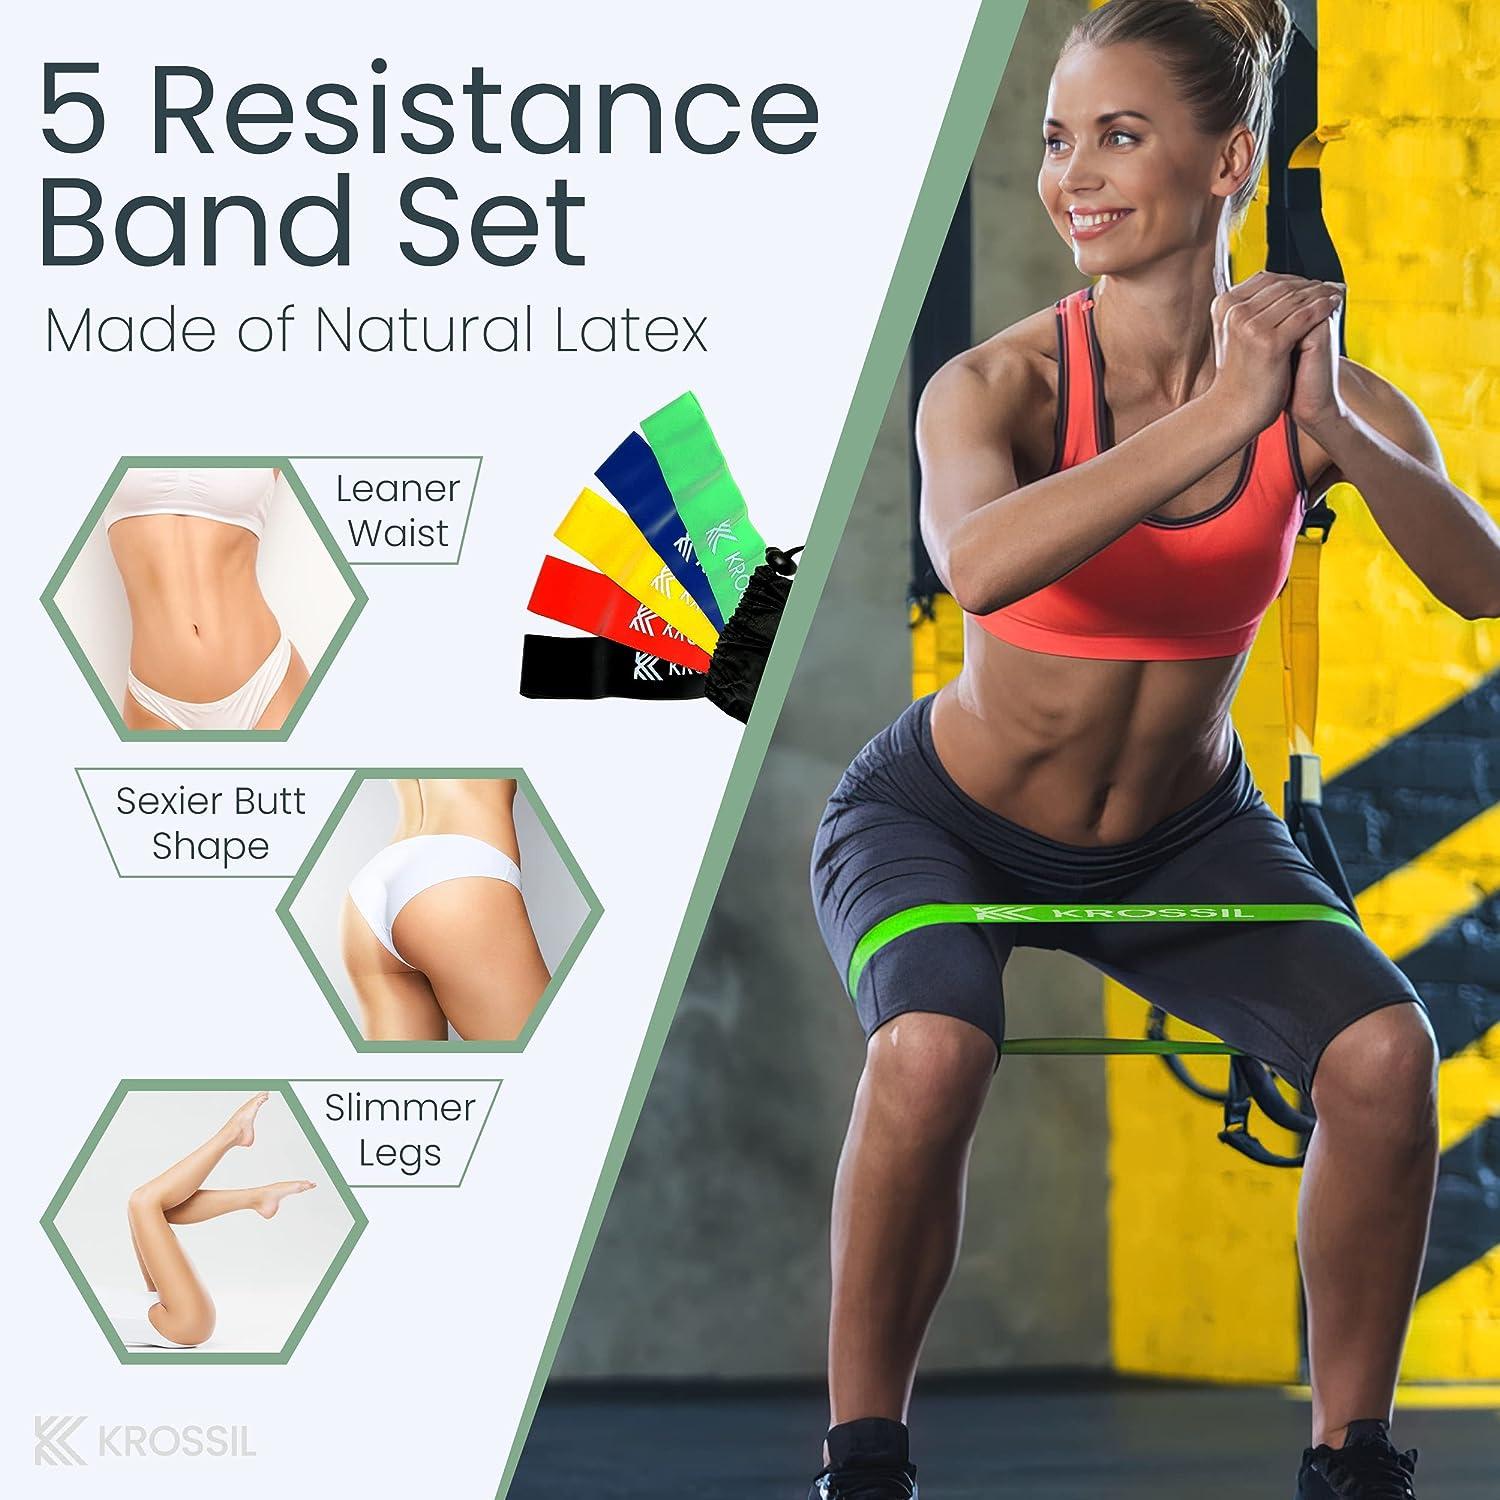 Pilates Bar Kit with 11 Resistance Bands for Women and Men